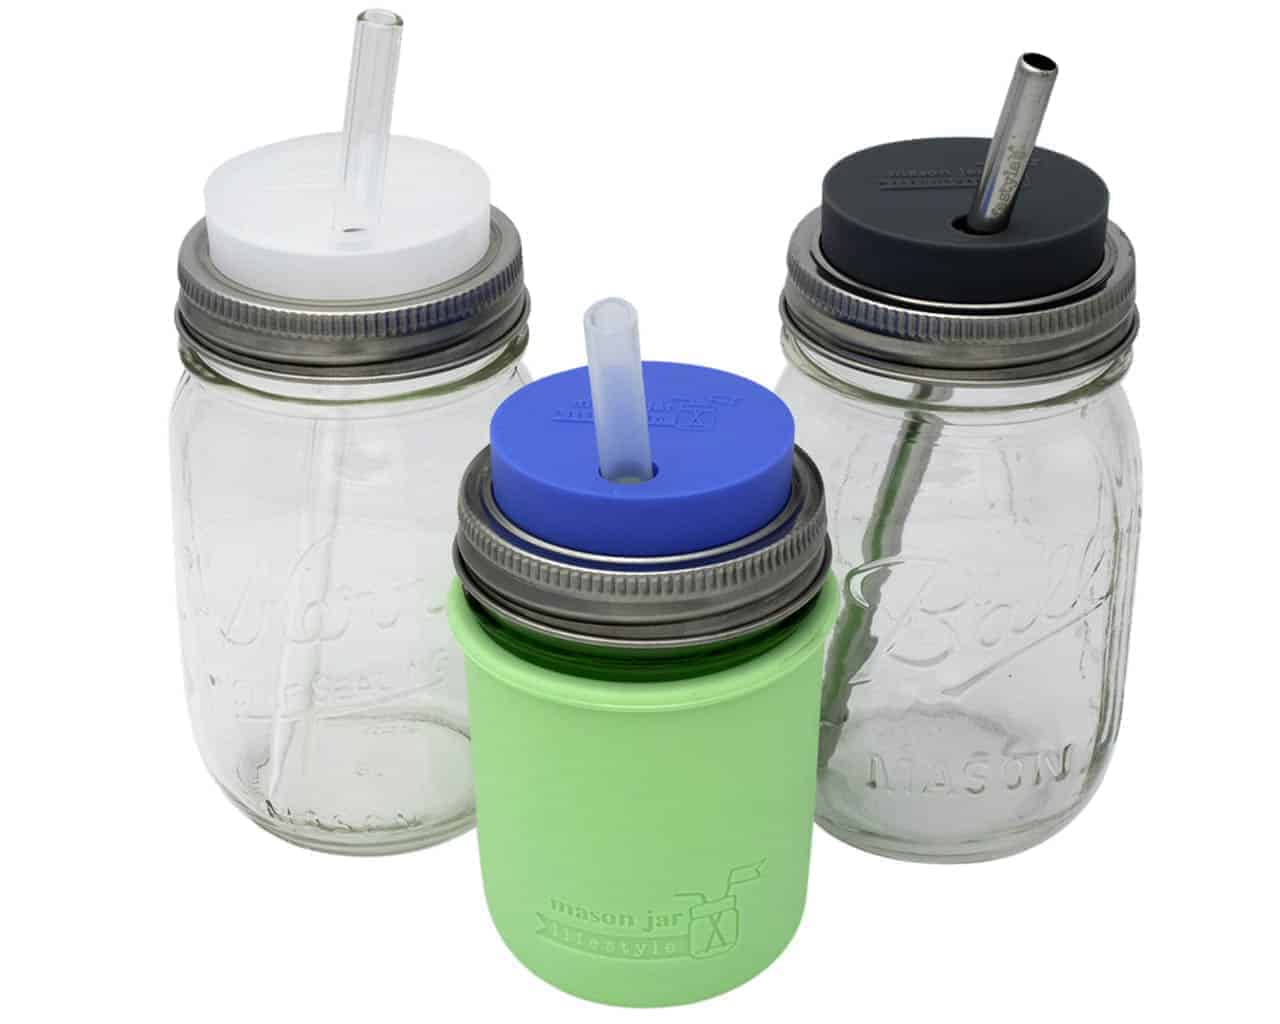 Silicone Caps with Straw Hole for Glass or Plastic Bottles - 6 Pack